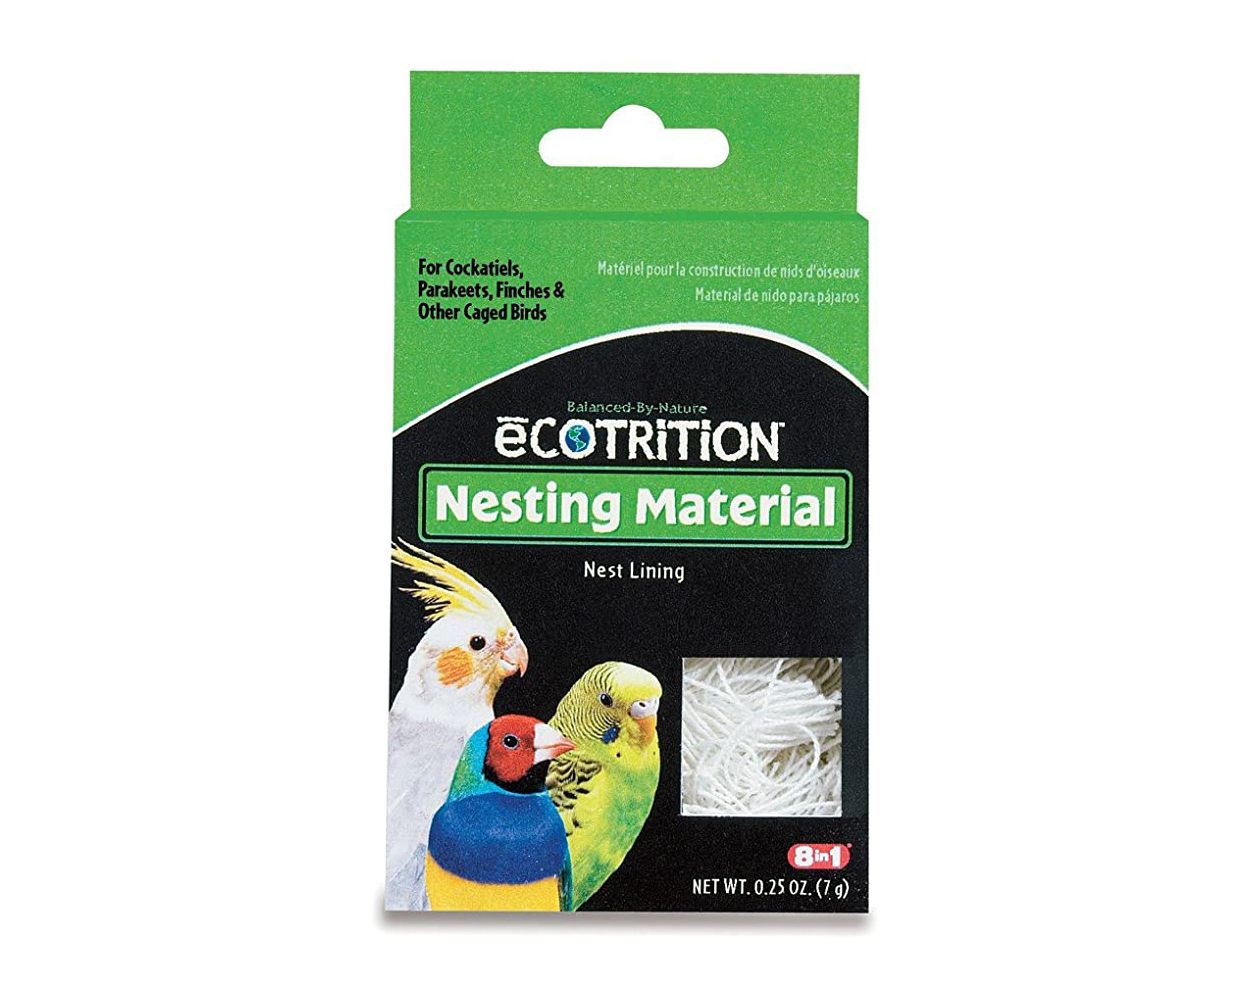 8 in 1 Ecotrition Nesting Material for Cockatiels Parakeets Finches 0.25 Oz 